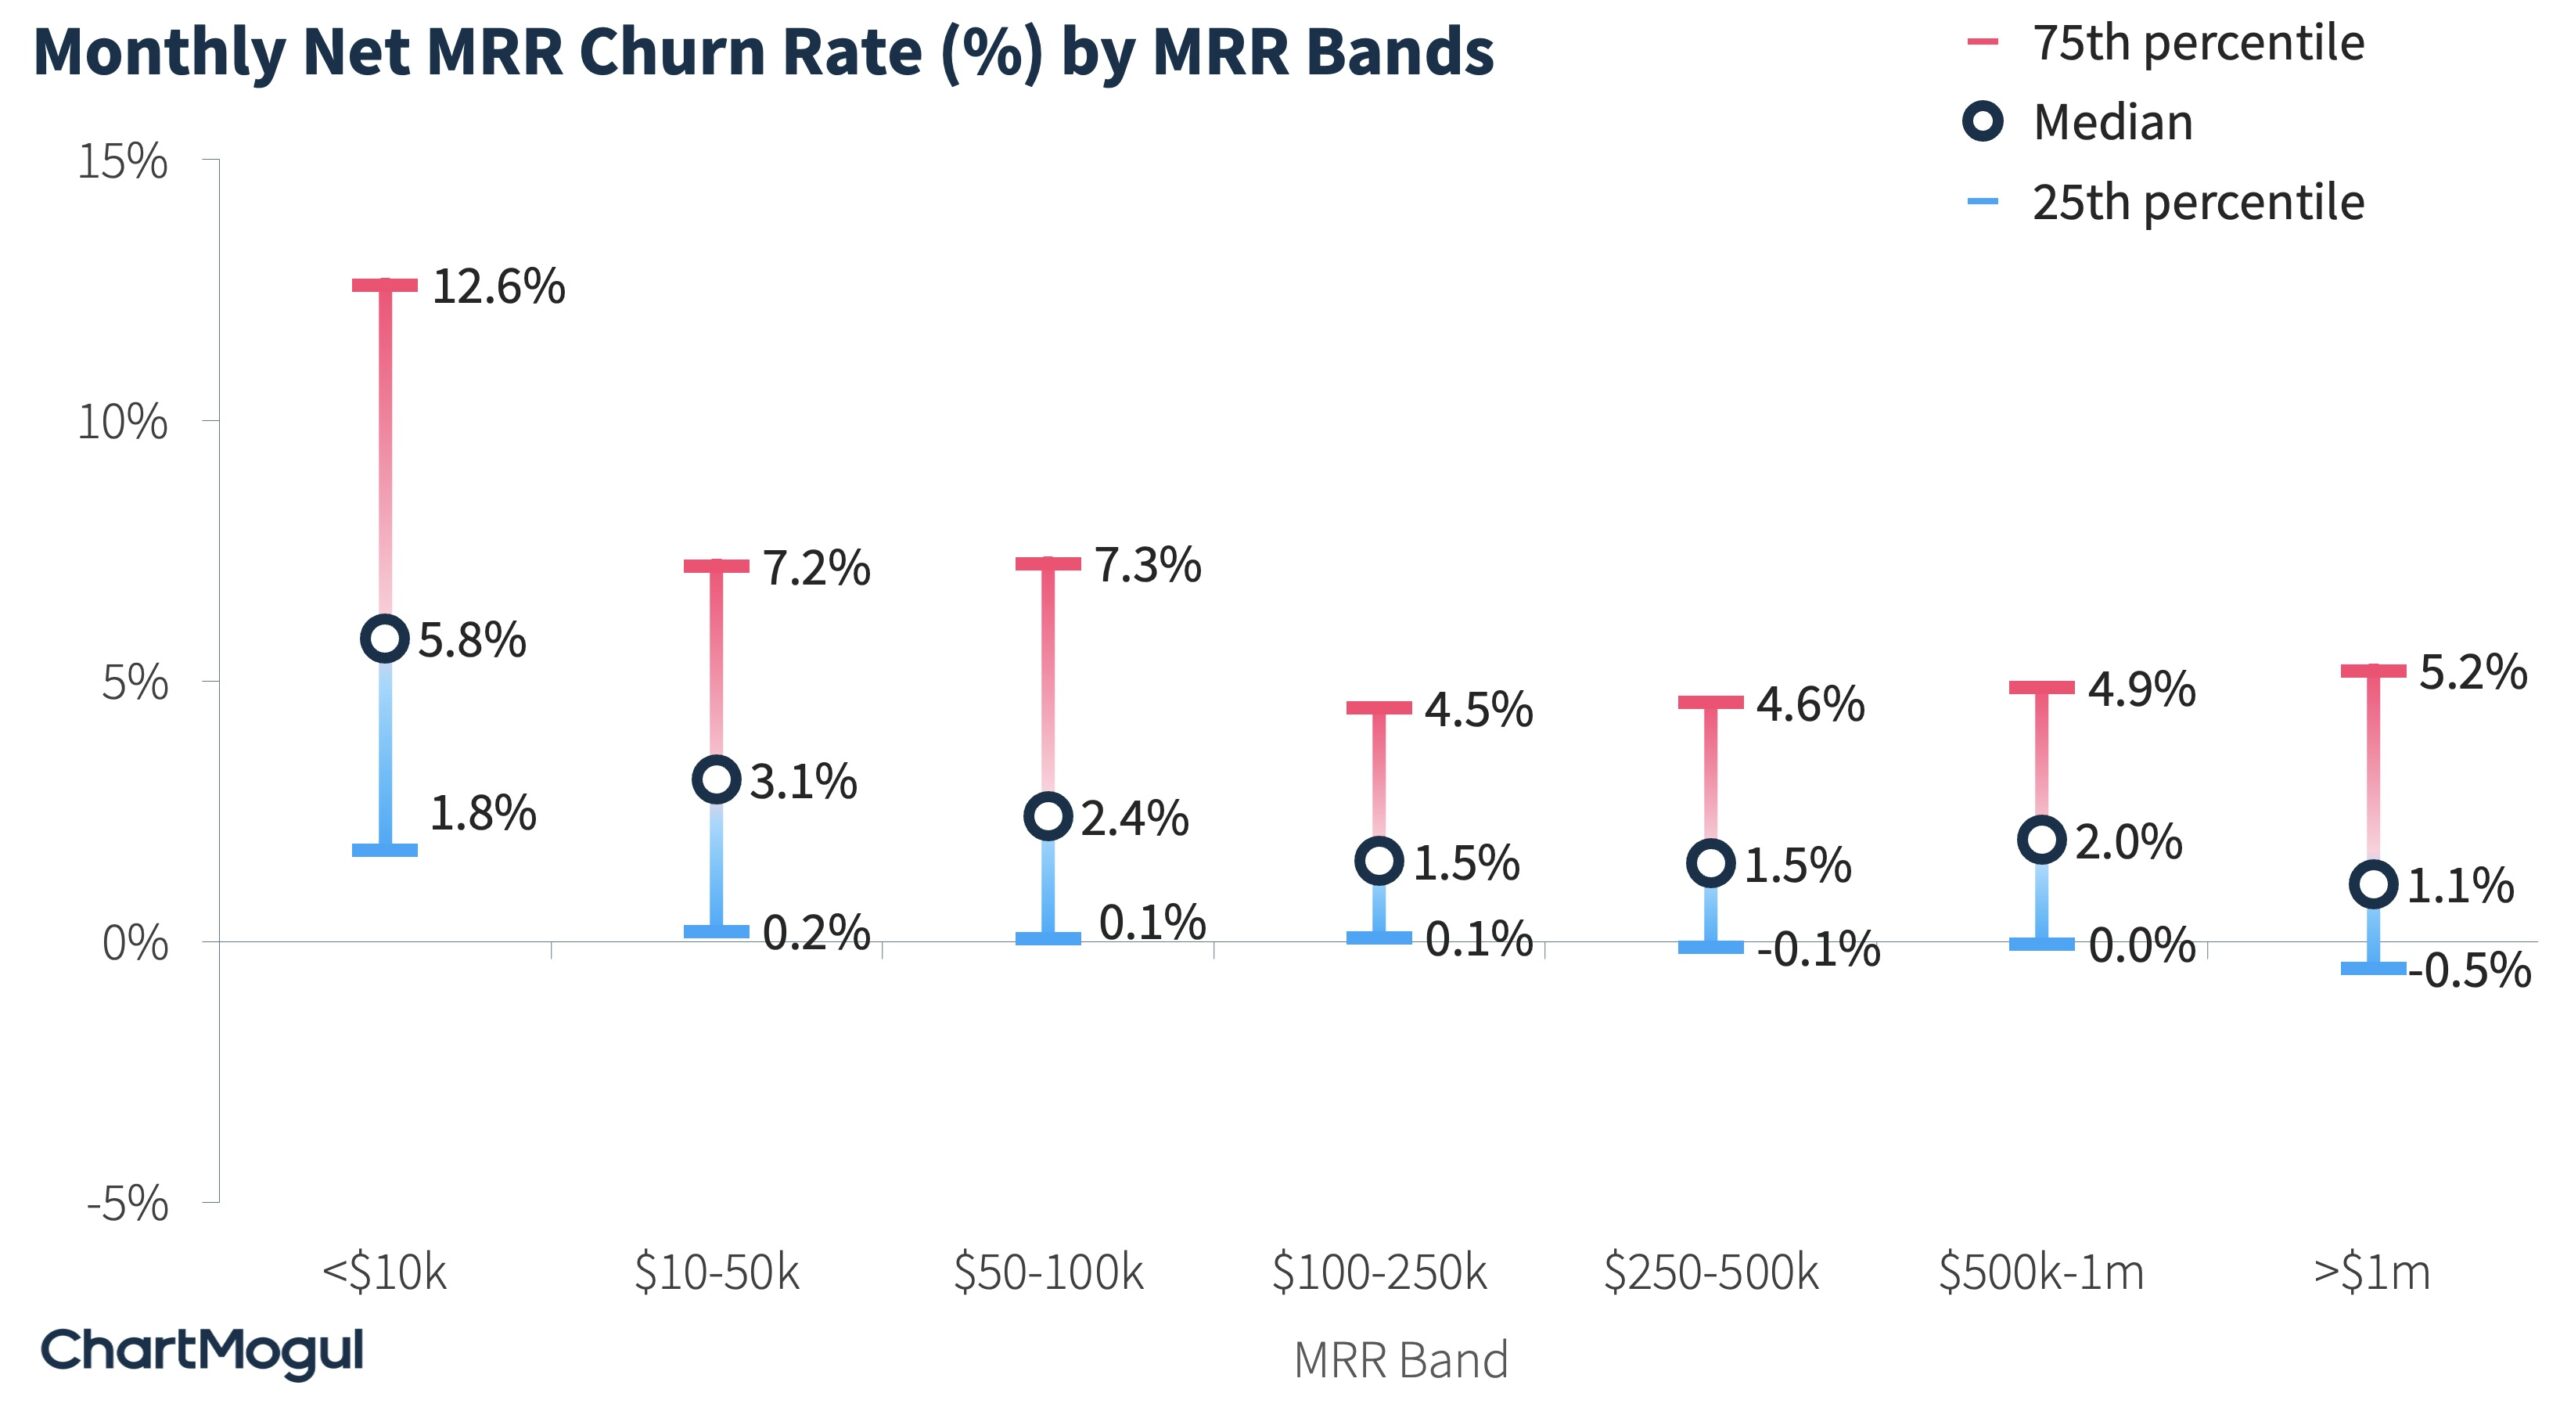 Net MRR Churn Rate Percentiles by MRR Bands